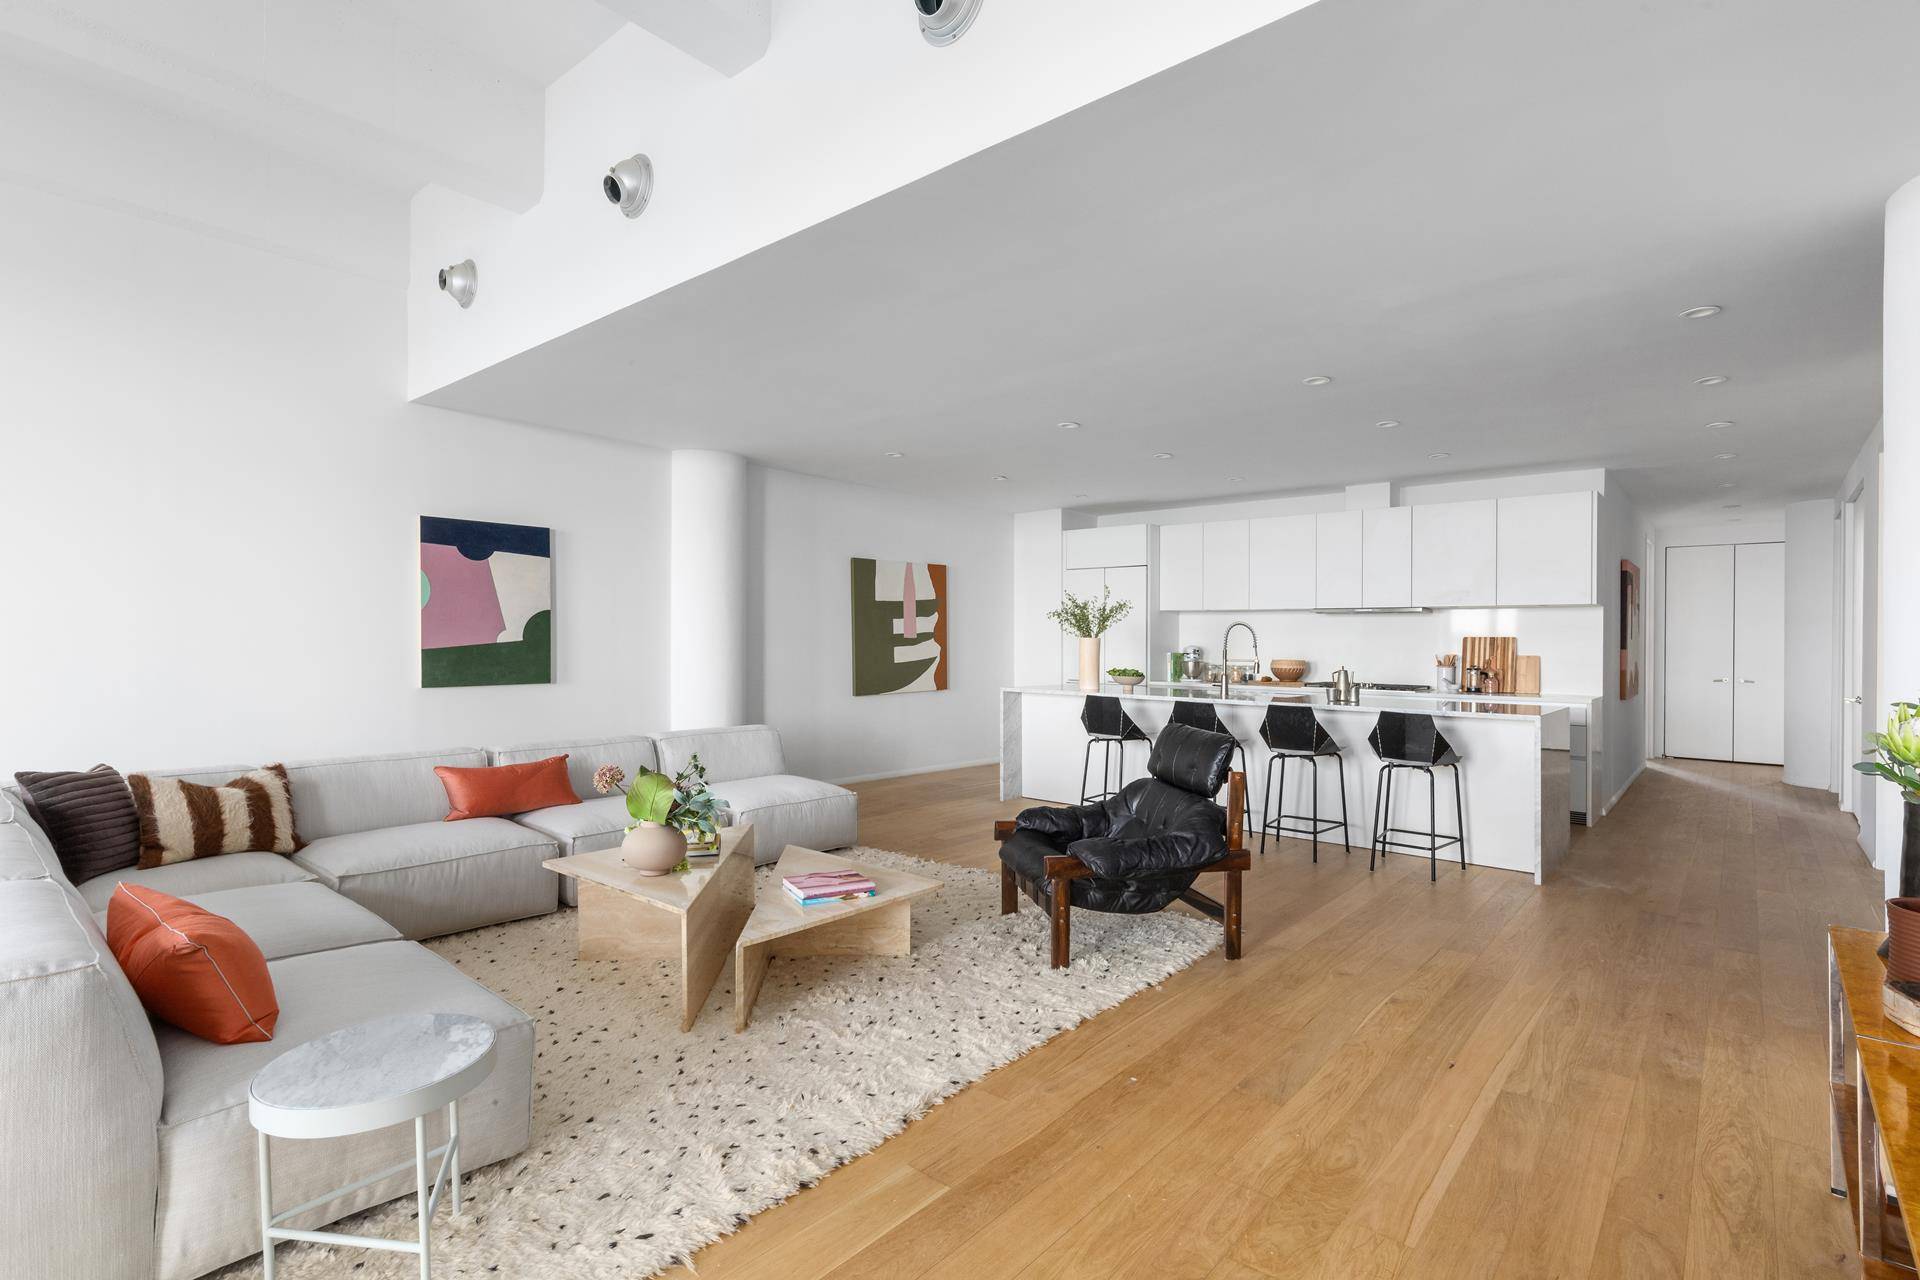 The Red Hook Lofts at 160 Imlay Street is an extraordinary residential conversion of the New York Dock Building that combines modern design intelligence with a historic sense of place, ...